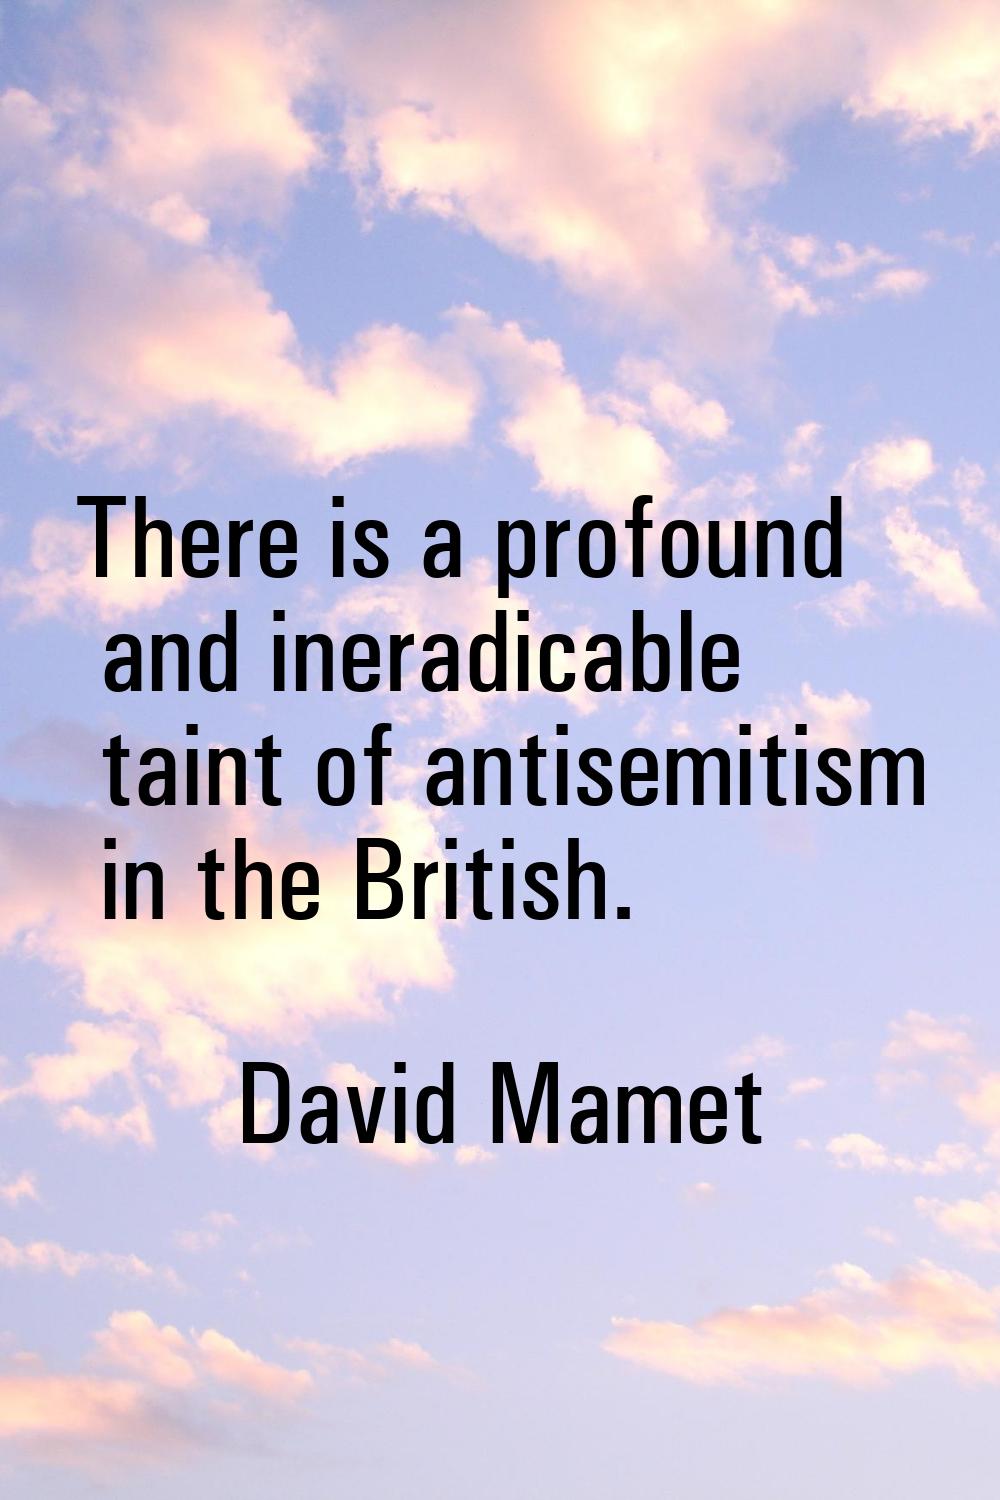 There is a profound and ineradicable taint of antisemitism in the British.